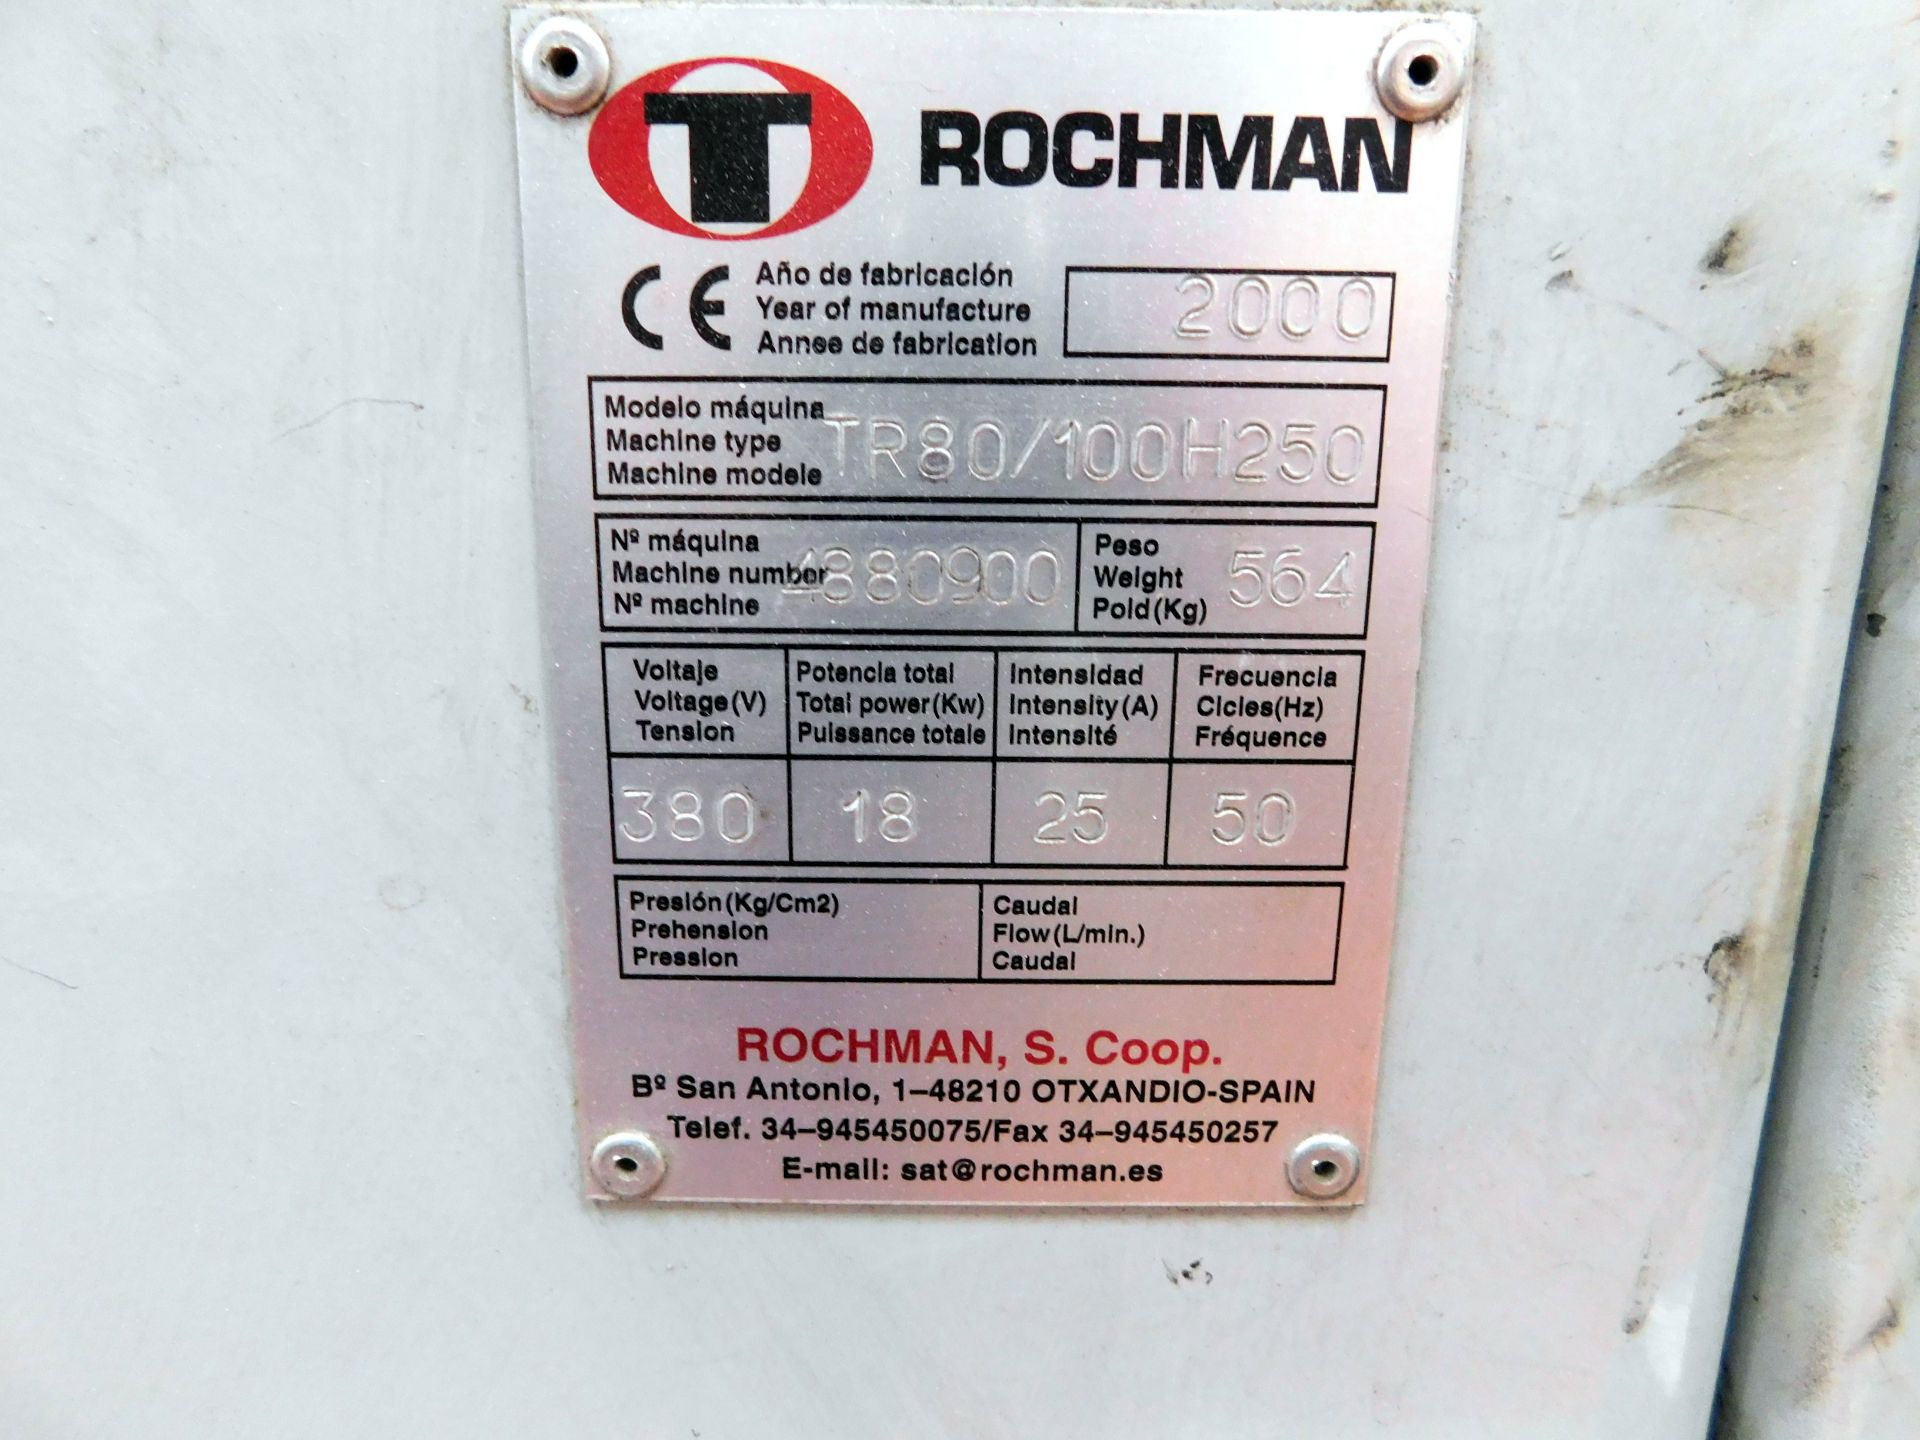 Rochman TR80/100 H250 Sealing Machine, Serial Number 4880900 (2000) With SLS120/80 Feed Bed, - Image 8 of 10